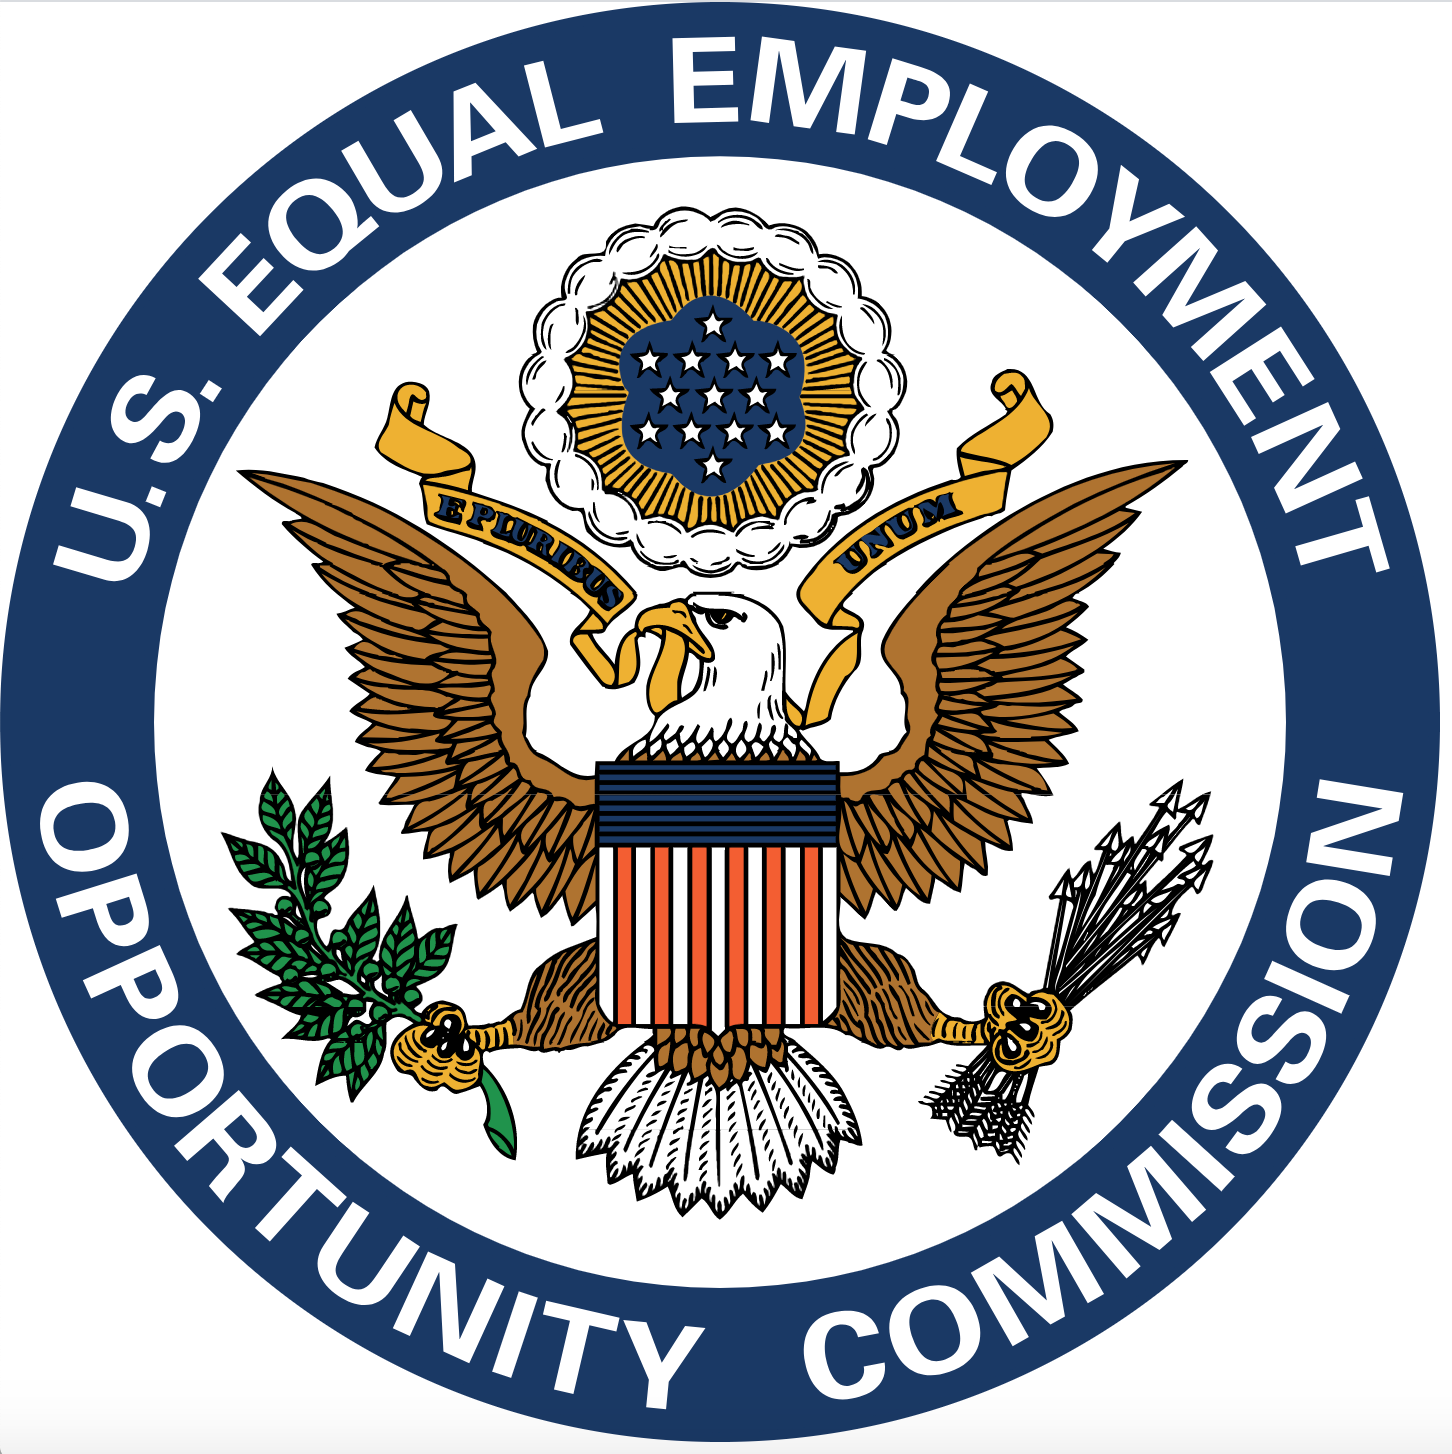 image: logo of the U.S. Equal Employment Opportunity Commission